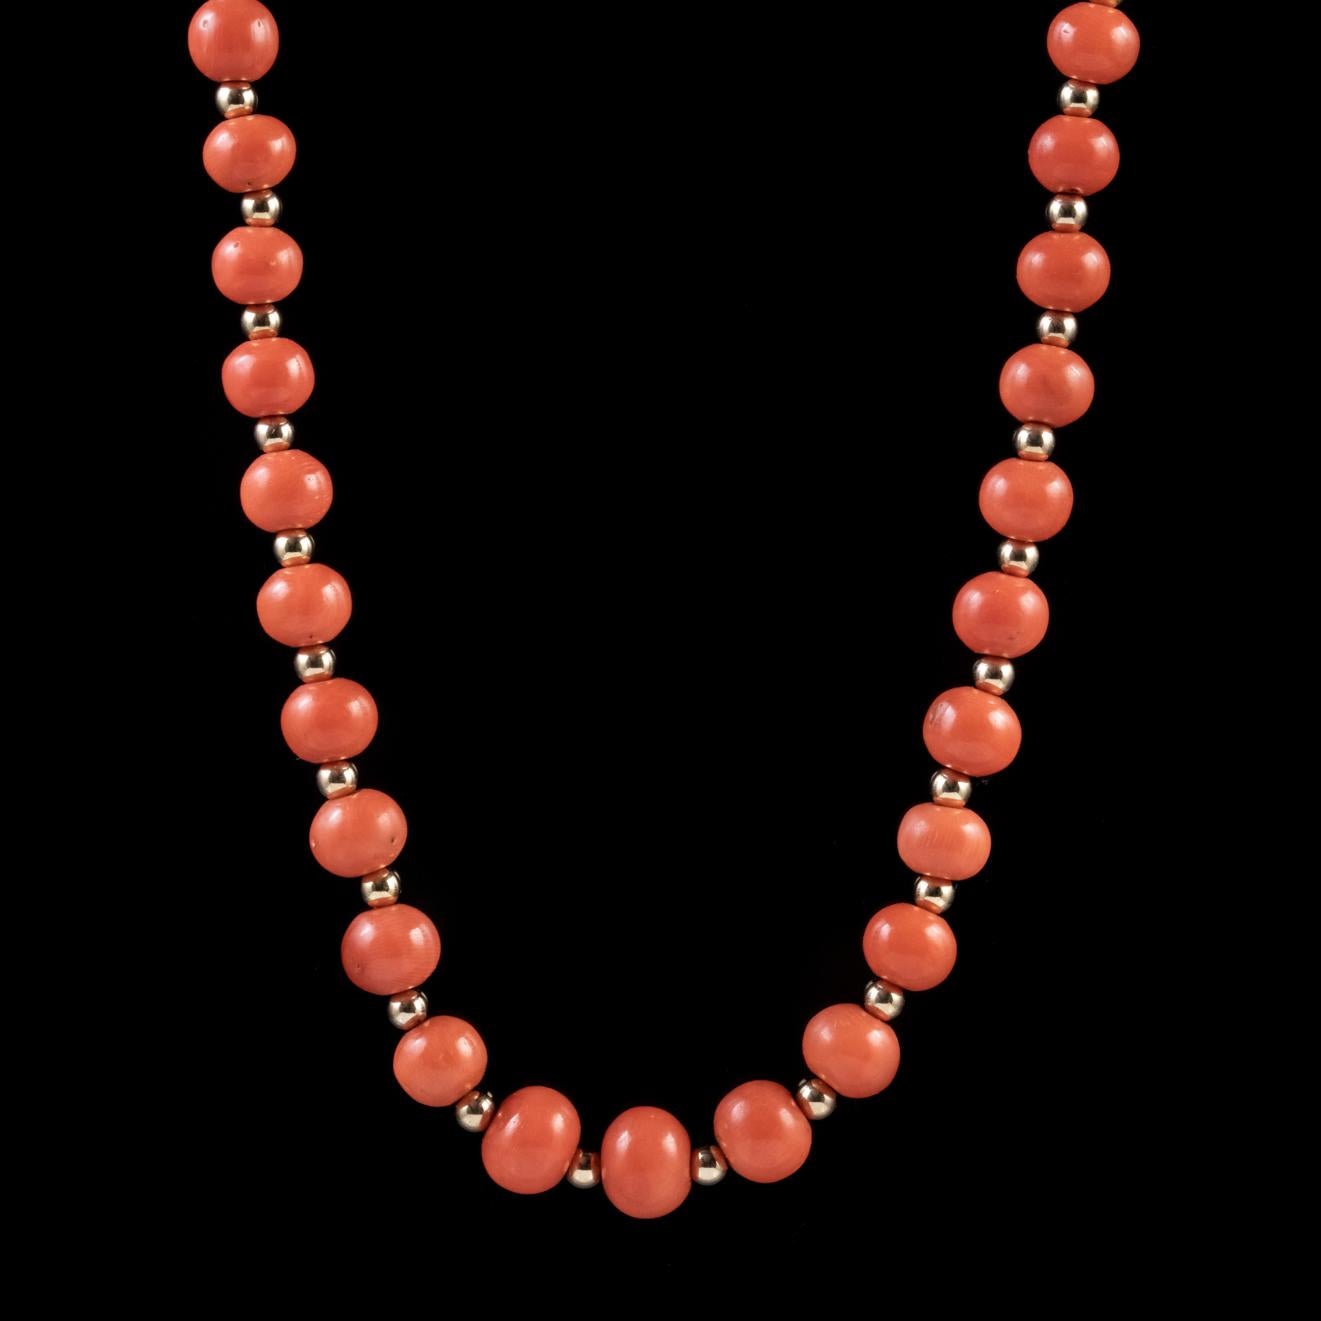 A beautiful antique Victorian graduated Coral necklace made up of polished Coral beads with smaller Golden balls in-between fashioned in 18ct Yellow Gold. 

Similar to Pearls, Coral is made naturally in the depths of the ocean and boasts fiery